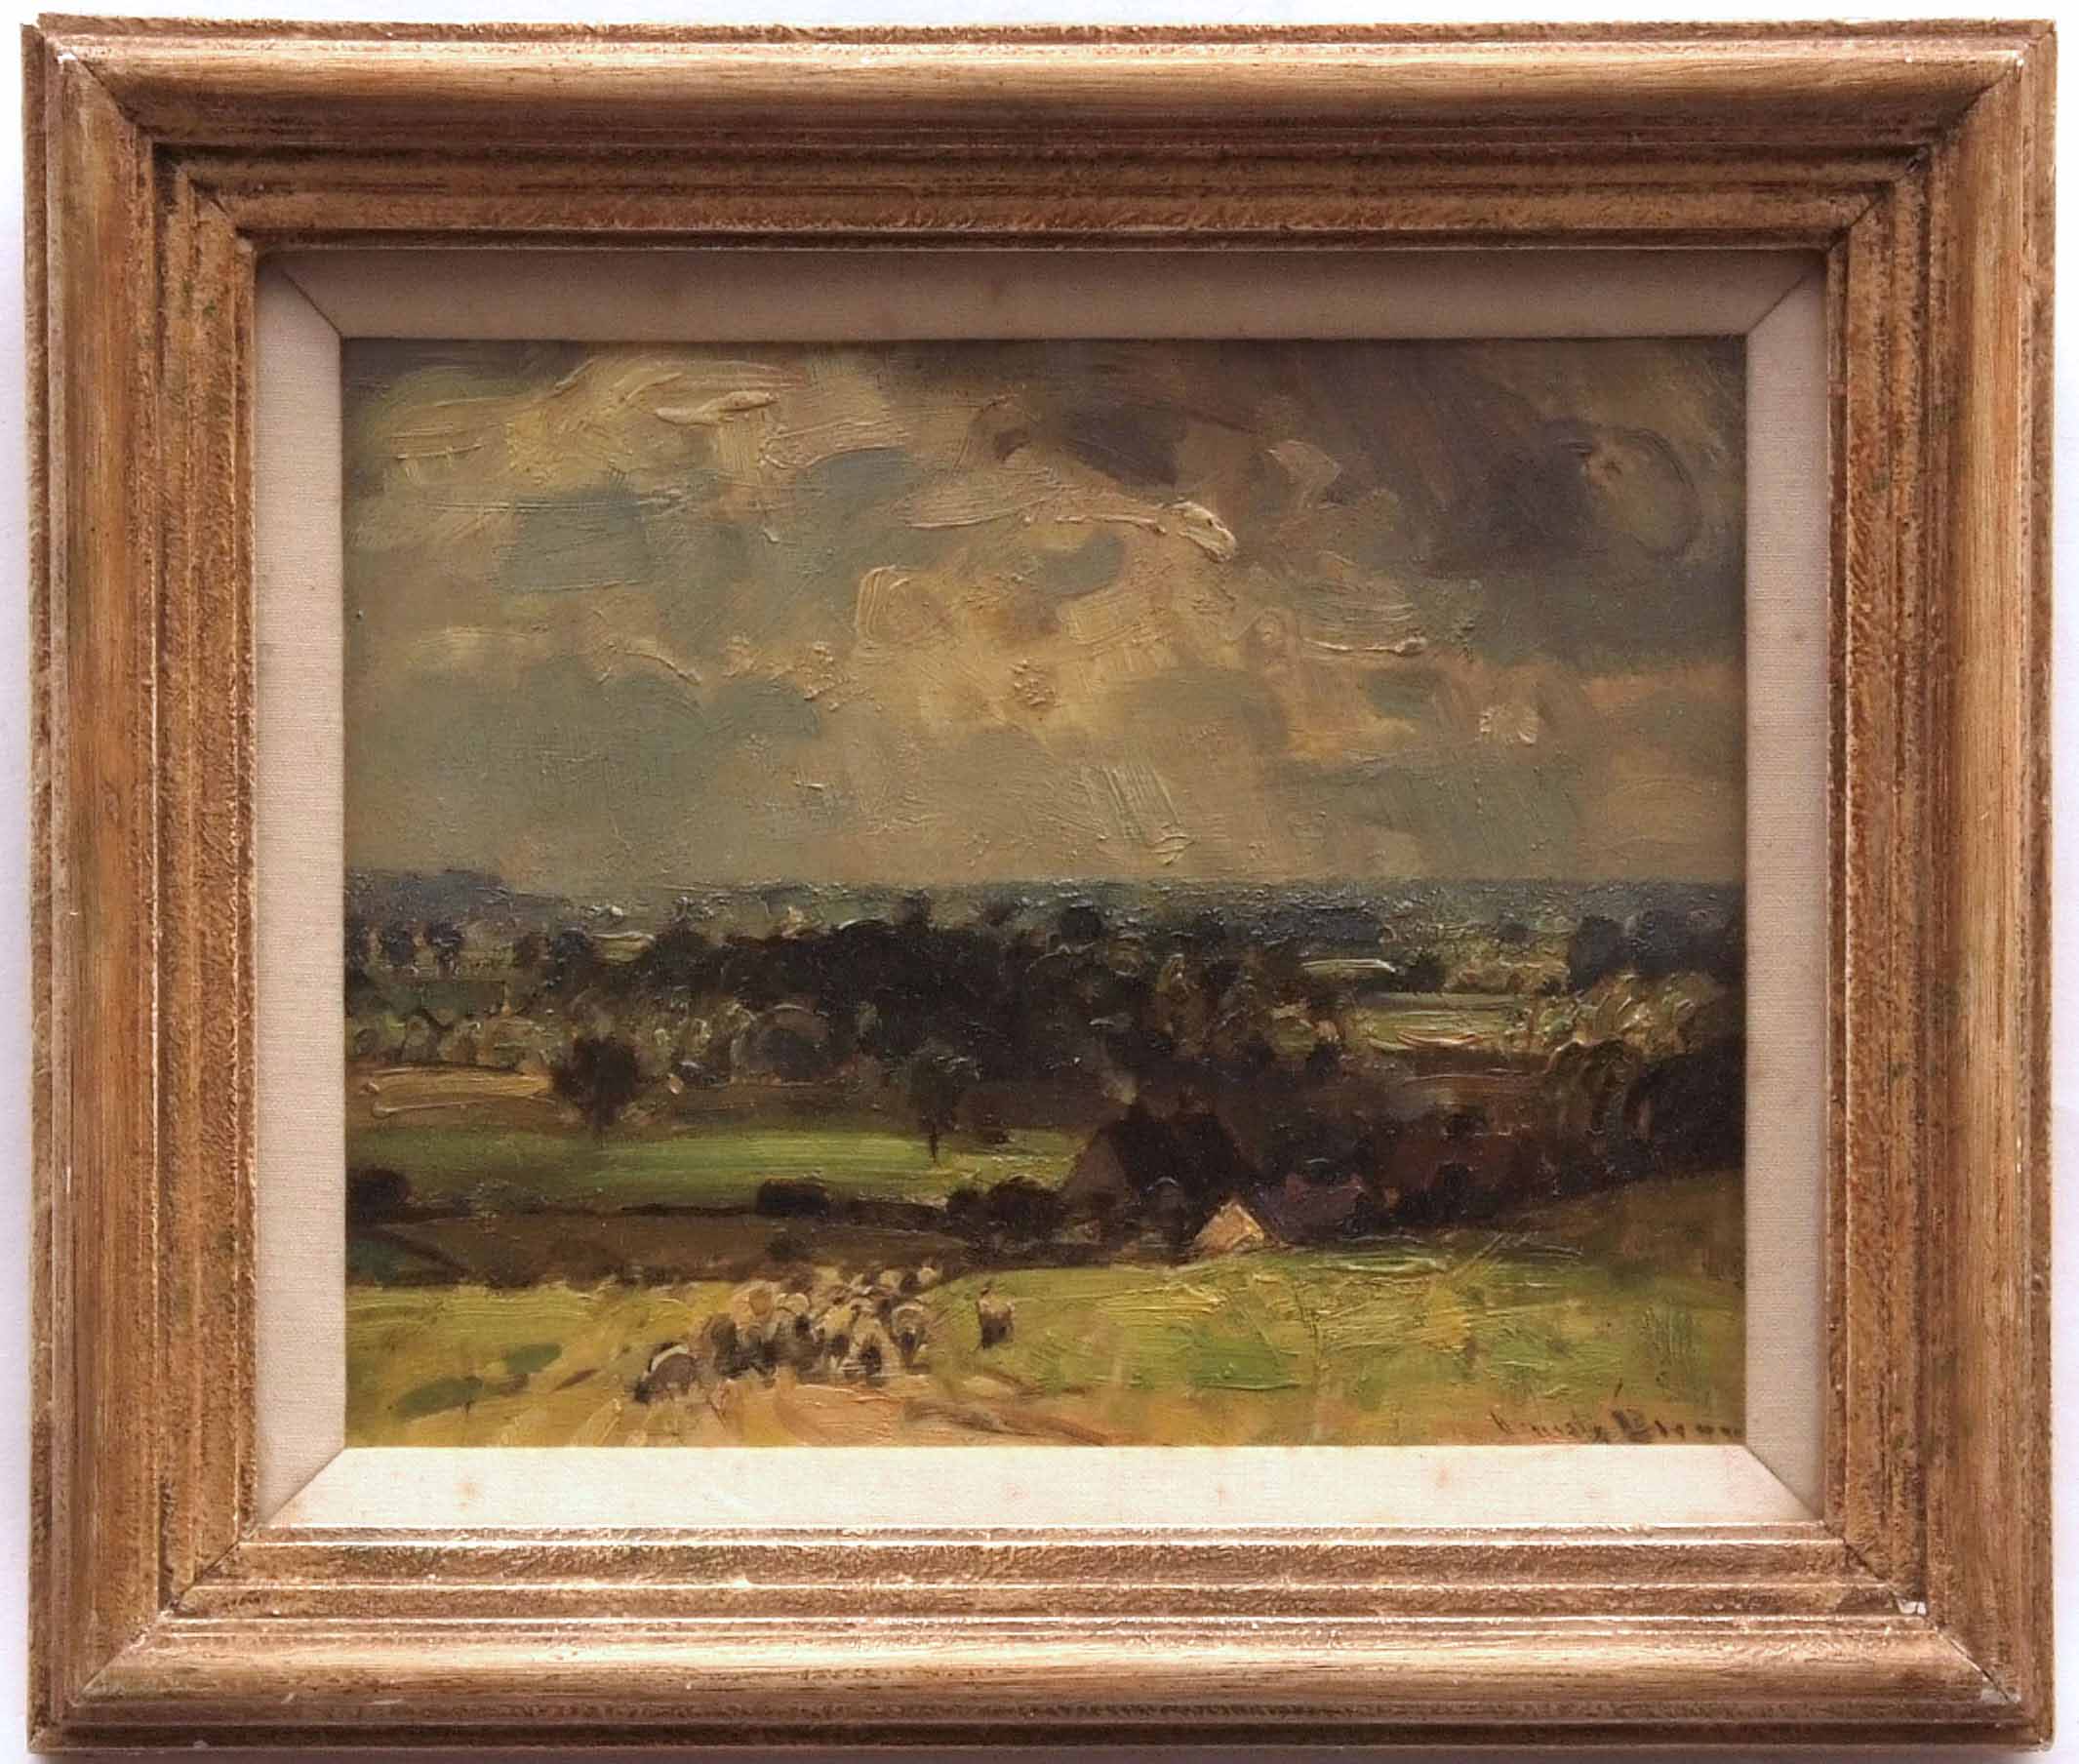 *SIR JOHN ALFRED ARNESBY-BROWN, RA (1866-1955, BRITISH) "Sketch for the Valley RA 1928" oil on